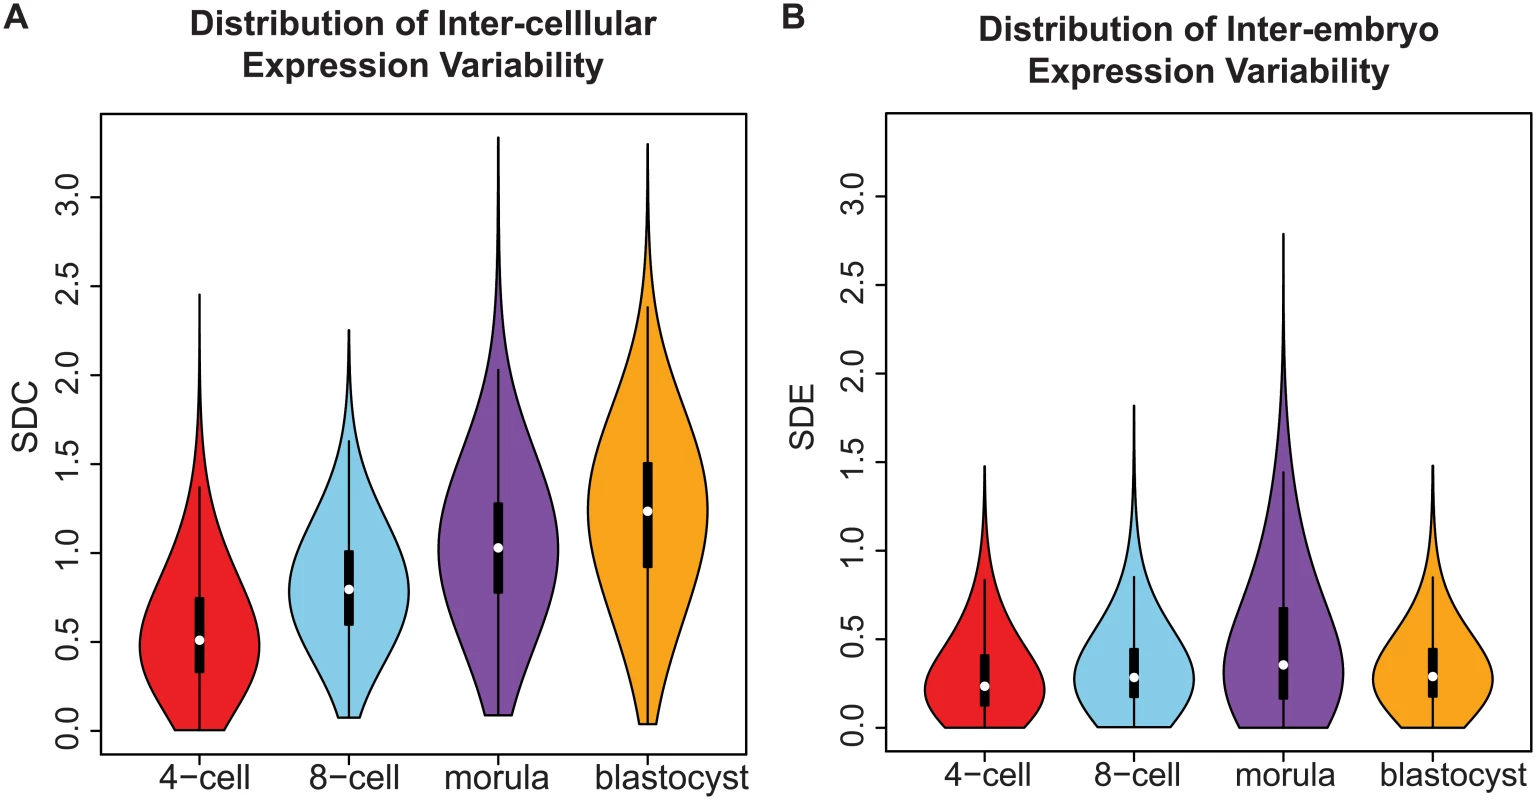 Distribution of gene expression variability during embryonic development.